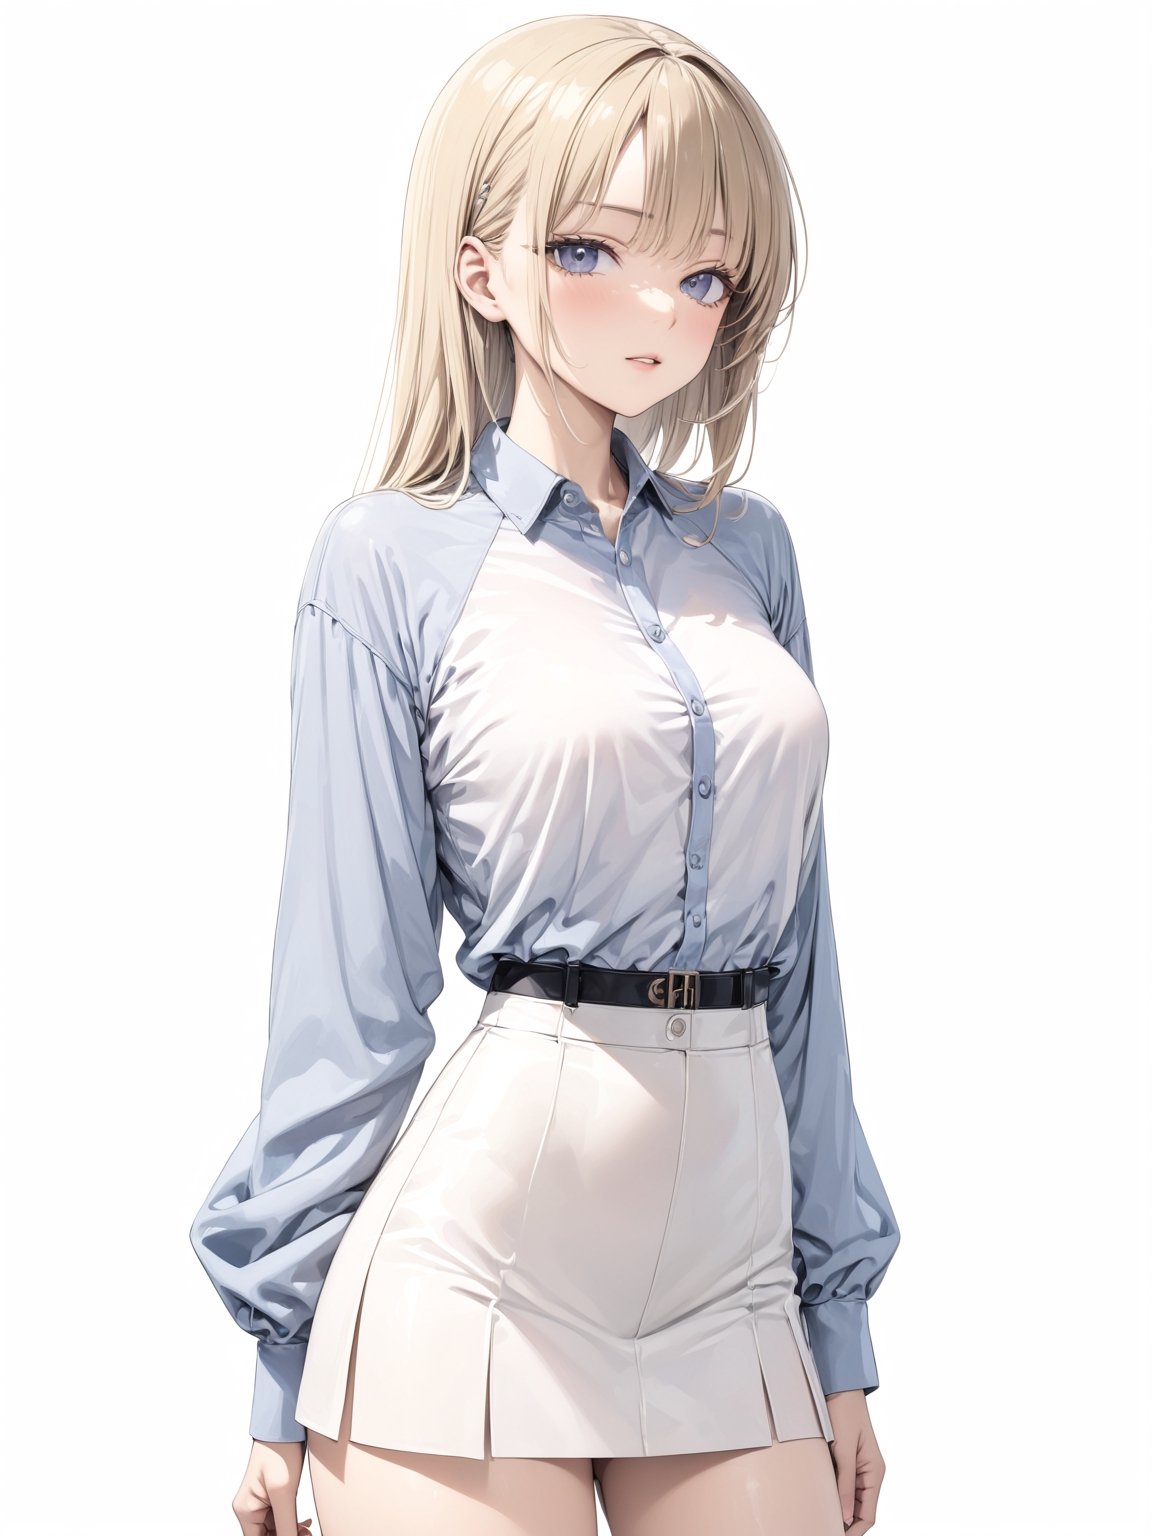 //Quality, masterpiece, best quality, detailmaster2, 8k, 8k UHD, ultra-high resolution, ultra-high definition, highres,
//Character, 1girl, solo, ,
//Fashion,
//Background, white_background,
//Others, ,KaruizawaKei